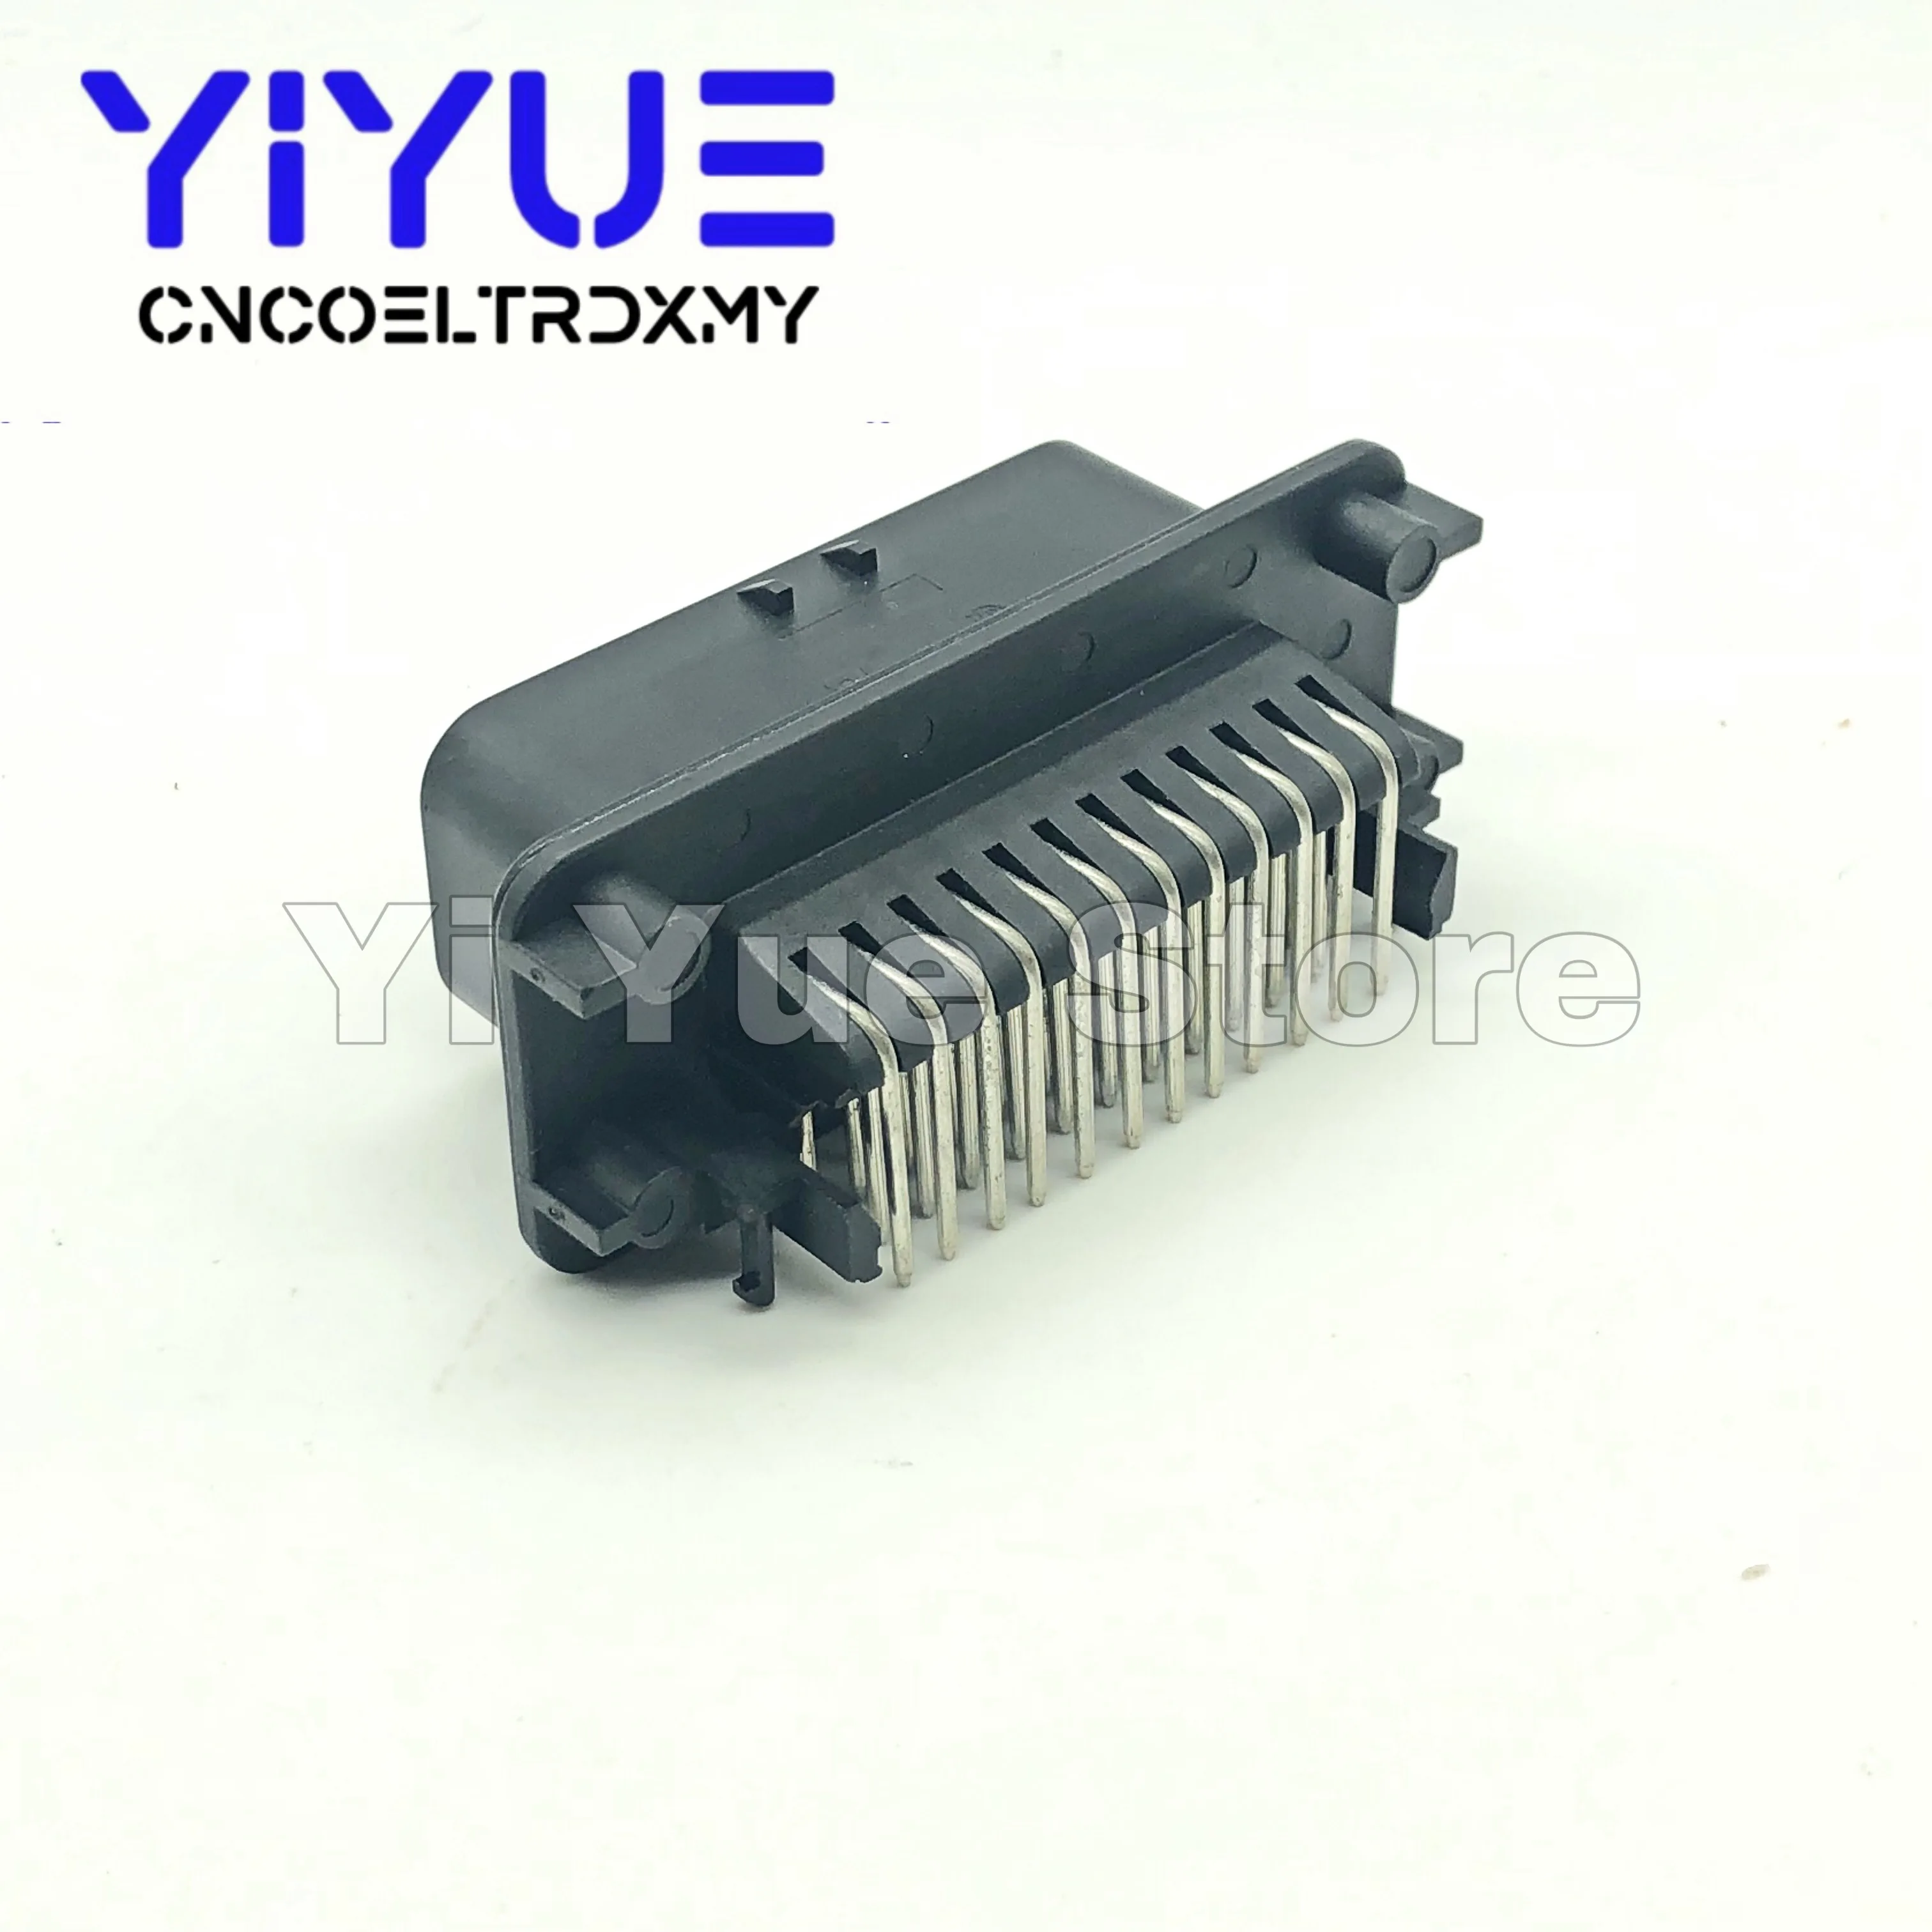 

5 sets 35pin Tyco AMP TE Male PCB ECU Auto Connector Plug 90 degree right-angle pinheader 776087-1 Mating part of 770680-1